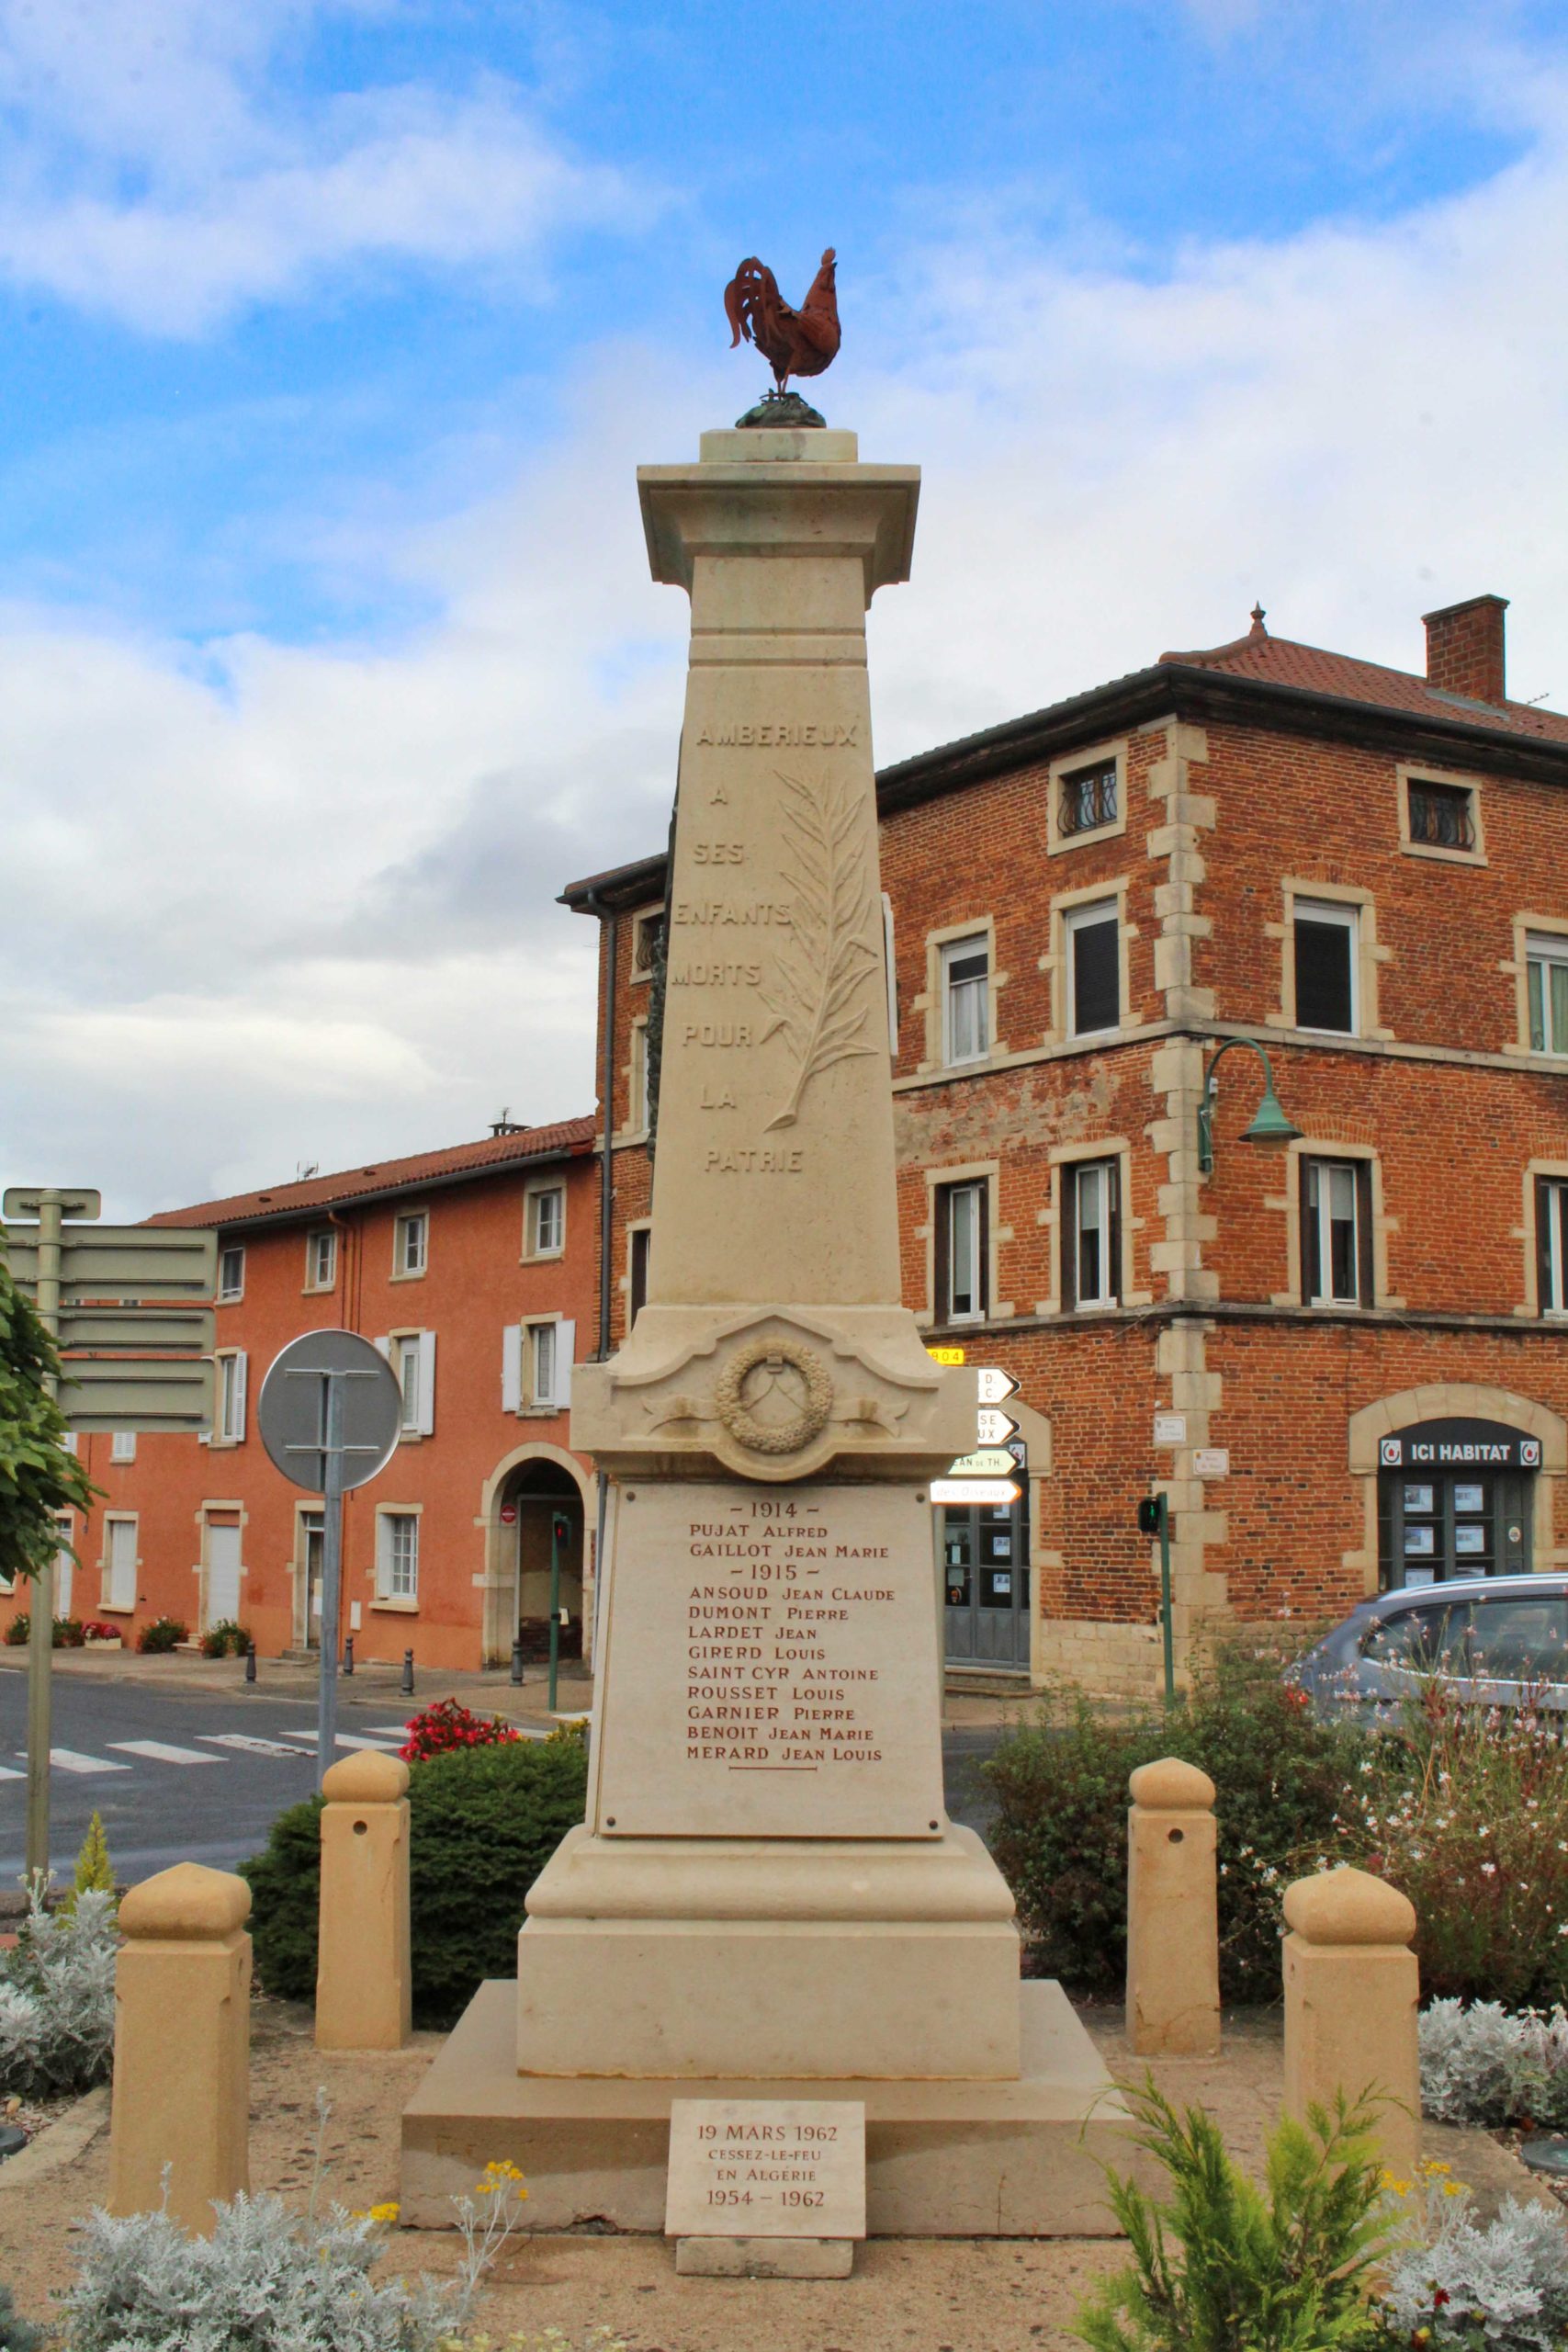 War Memorial Ambérieux-en-Dombes © Chabe01 - licence [CC BY-SA 4.0] from Wikimedia Commons